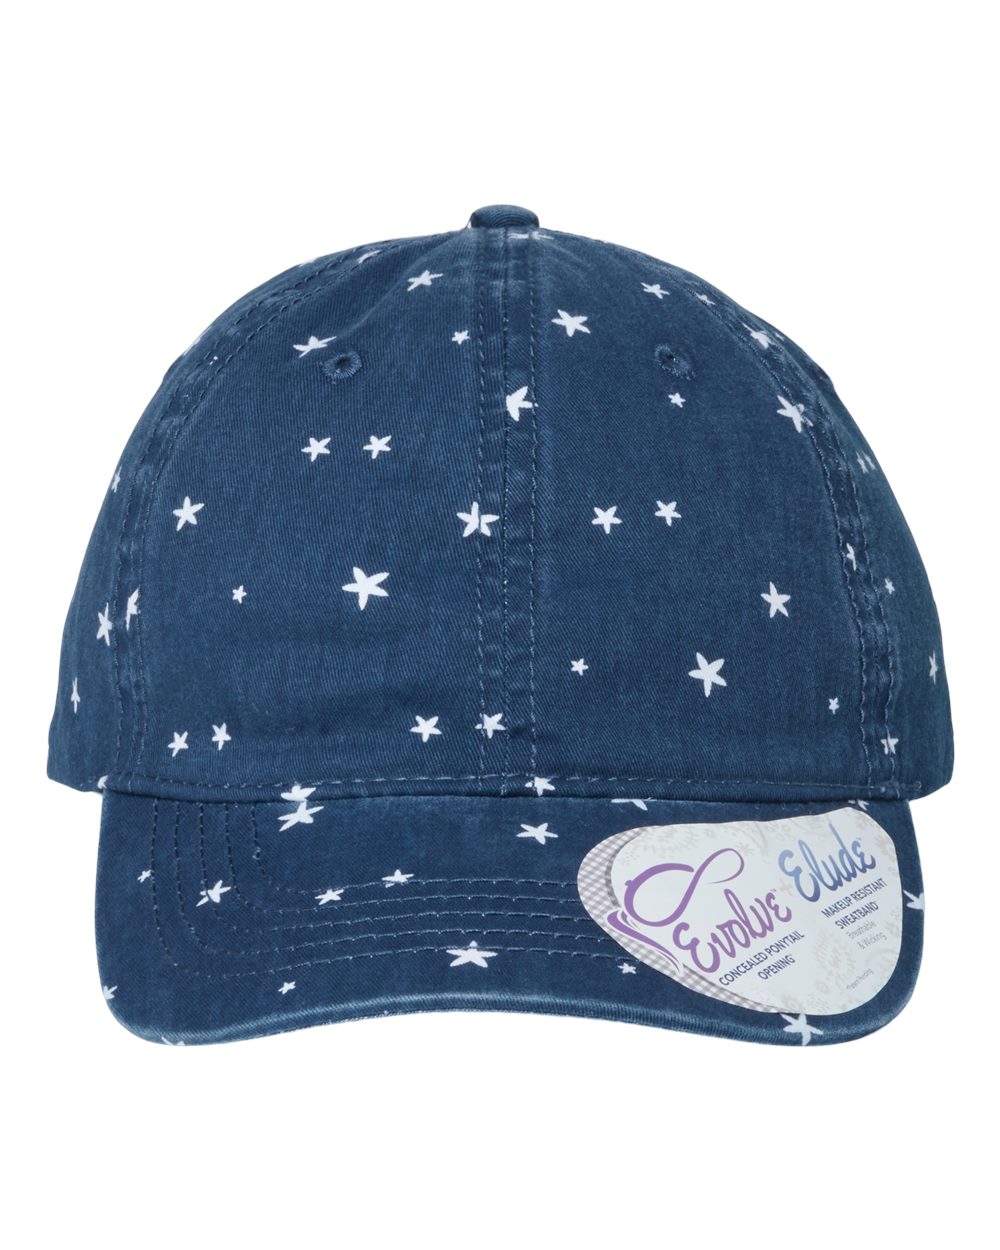 A women's garment-washed fashion print cap in navy with white stars.